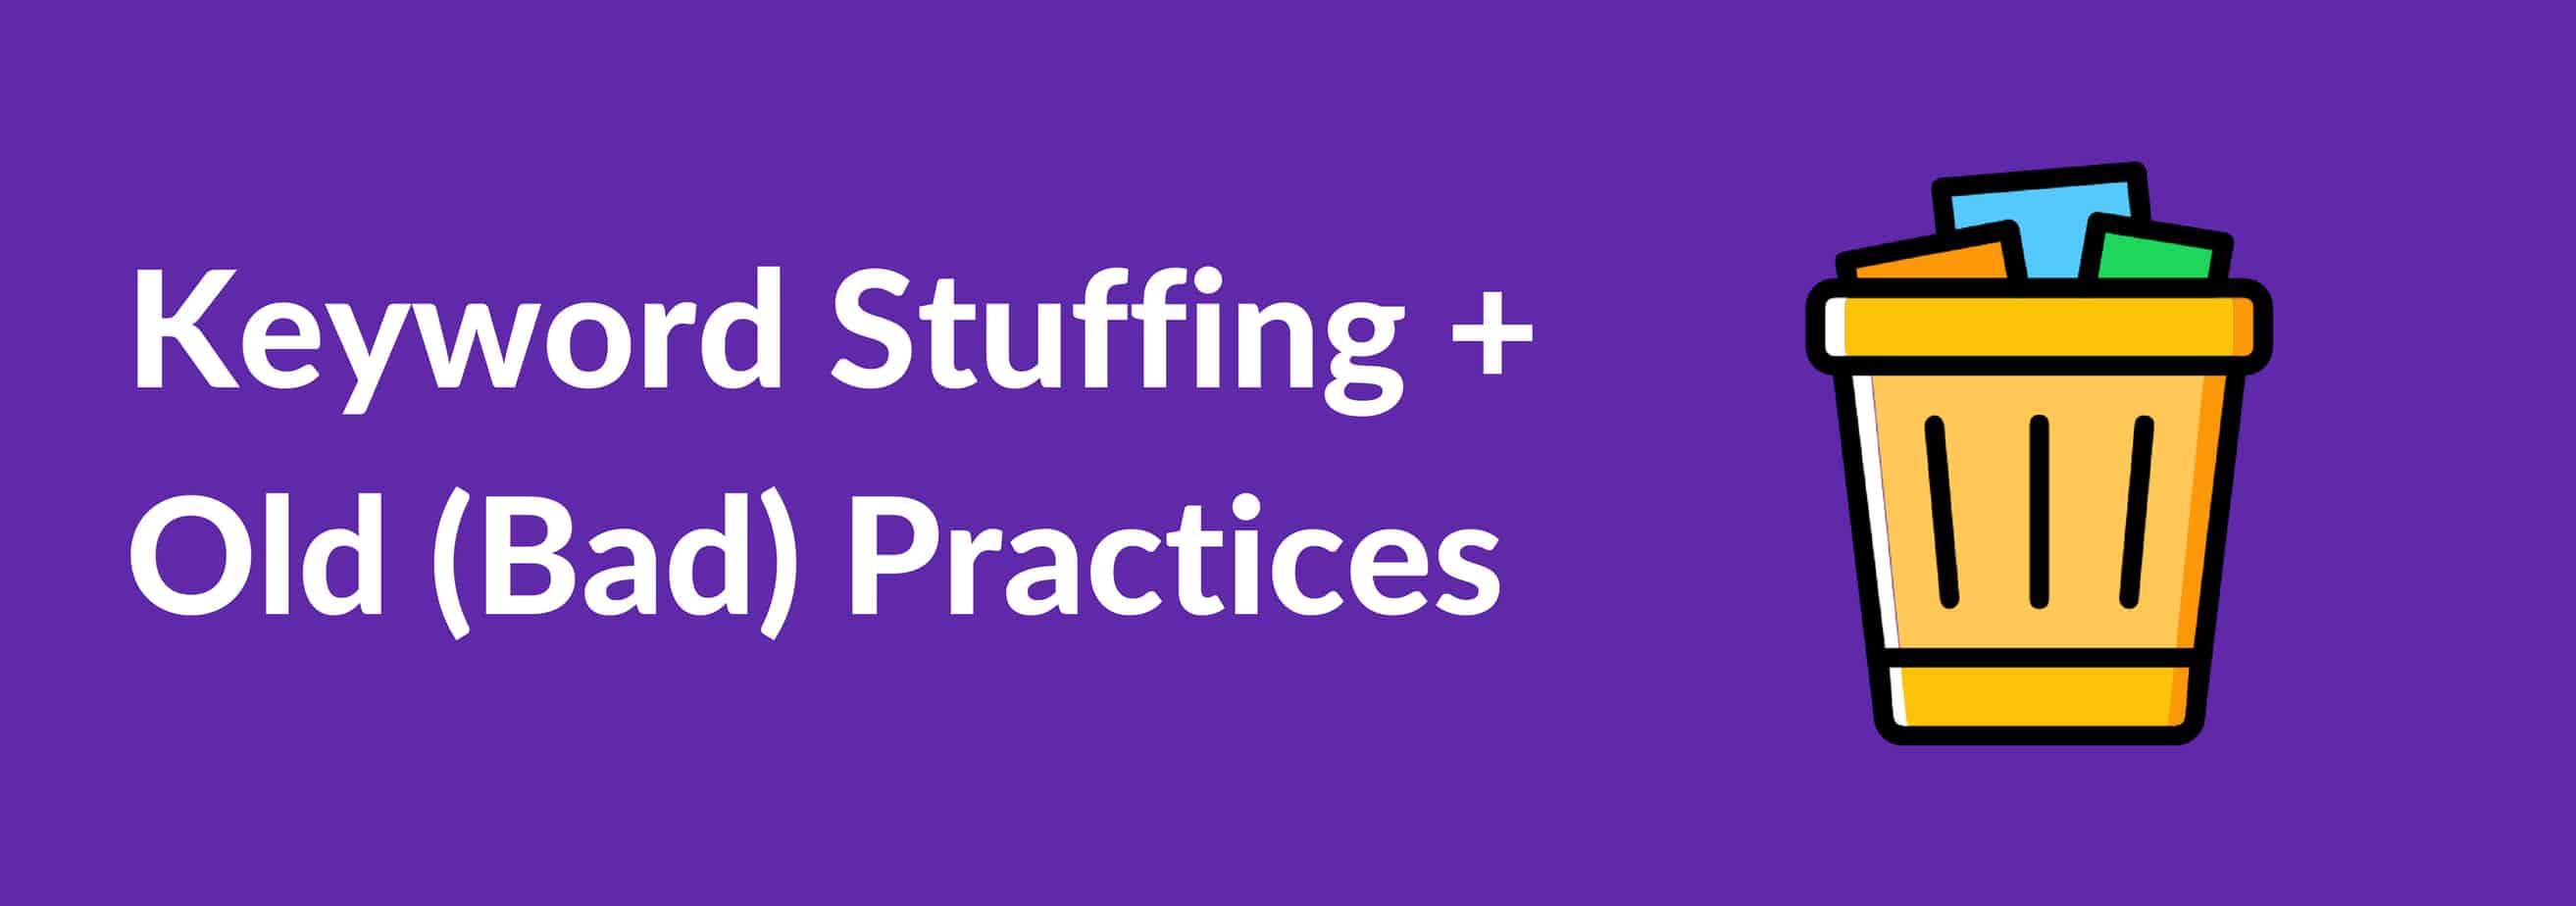 Keyword Stuffing + Old (Bad) Practices